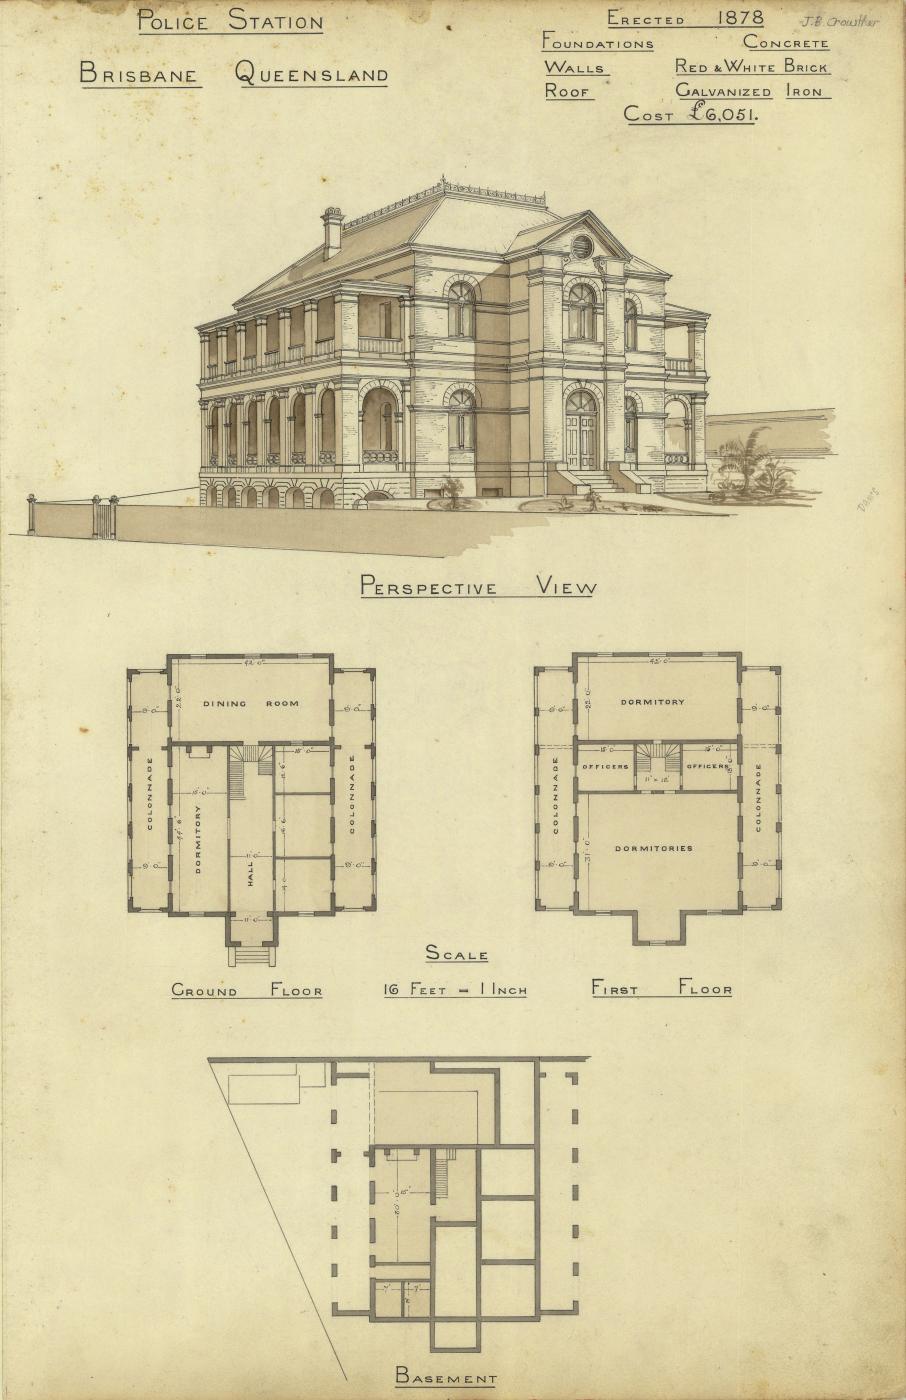 Architectural plans of the Roma Street Police Station, Brisbane